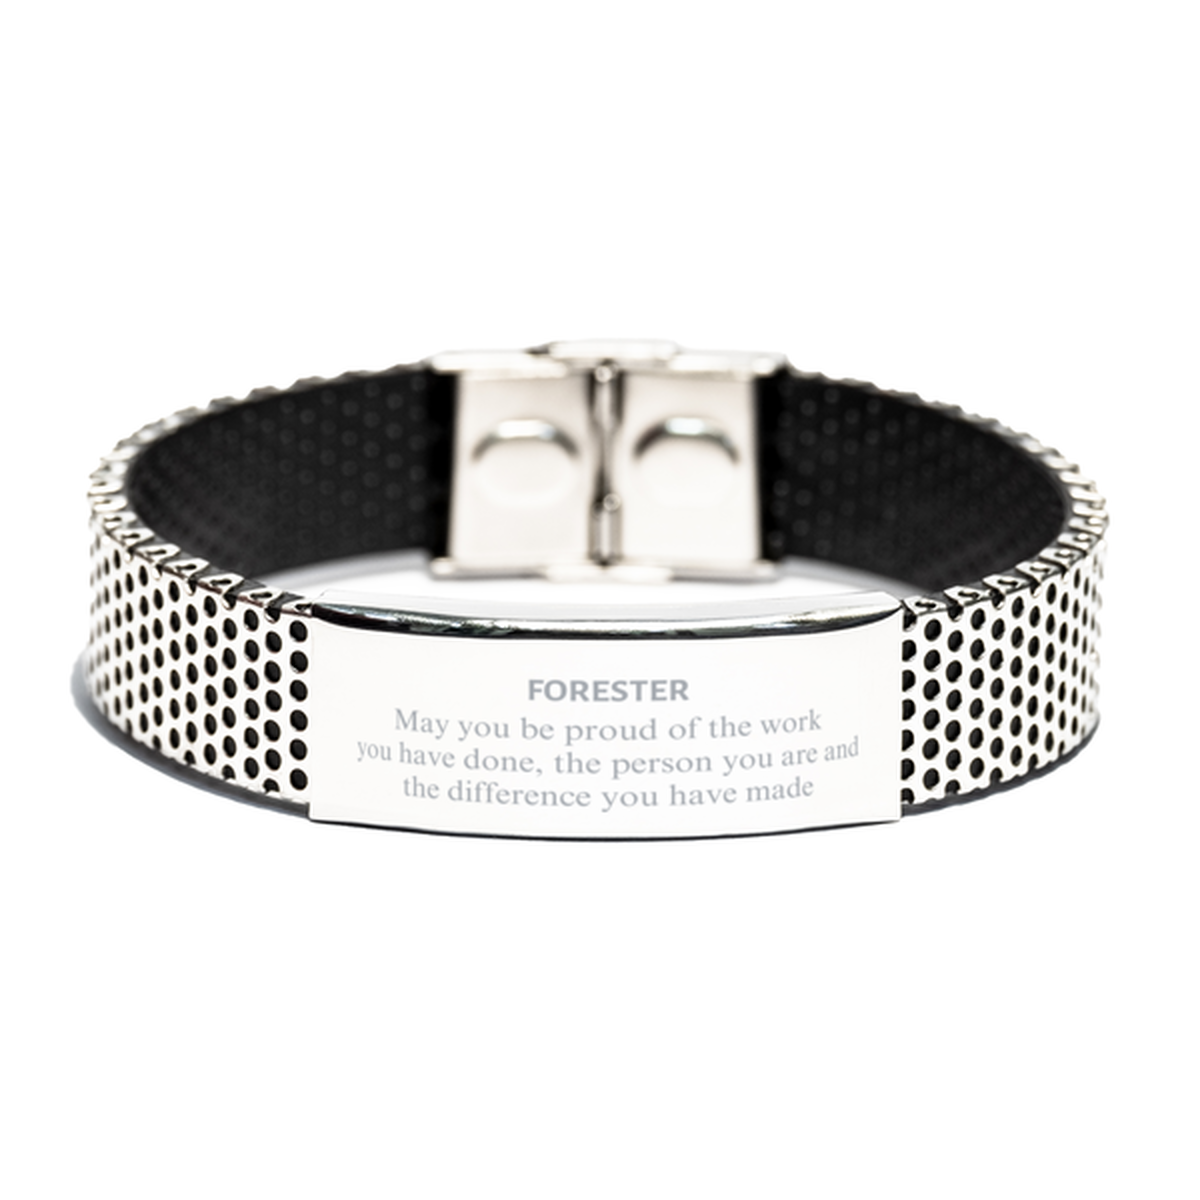 Forester May you be proud of the work you have done, Retirement Forester Stainless Steel Bracelet for Colleague Appreciation Gifts Amazing for Forester